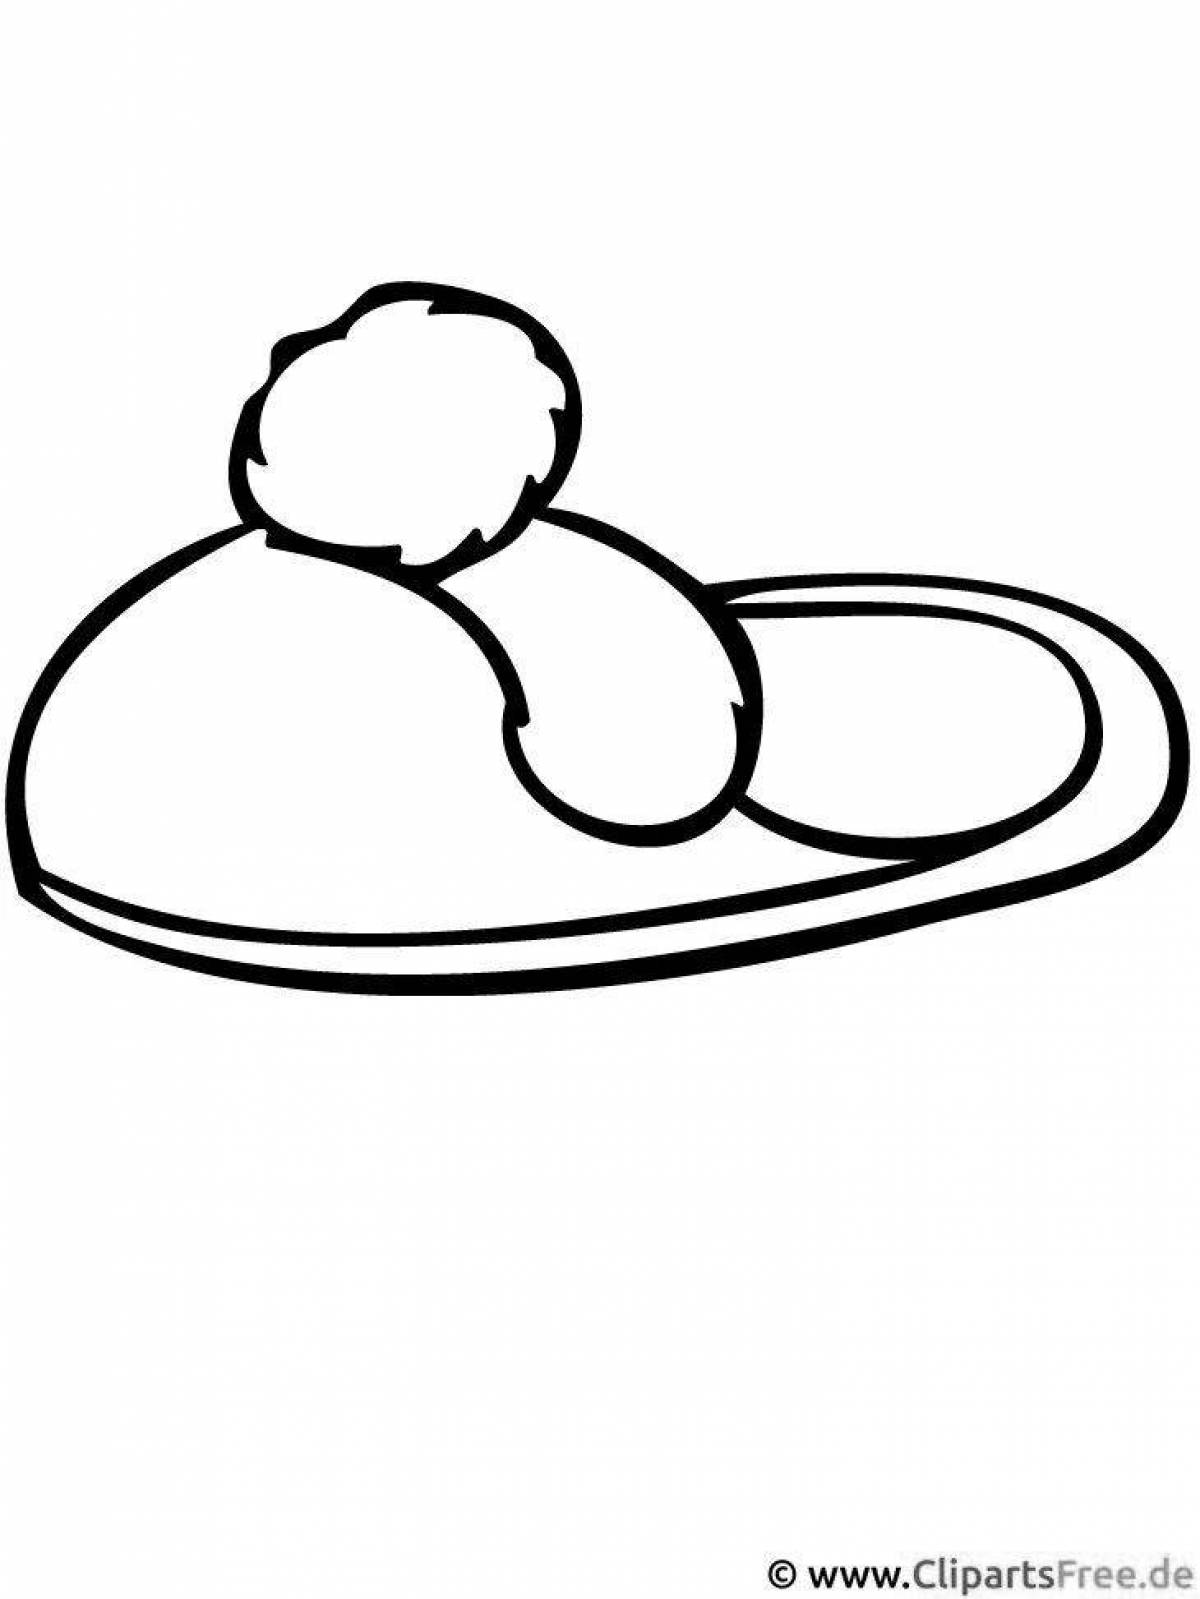 Colourful slippers coloring page